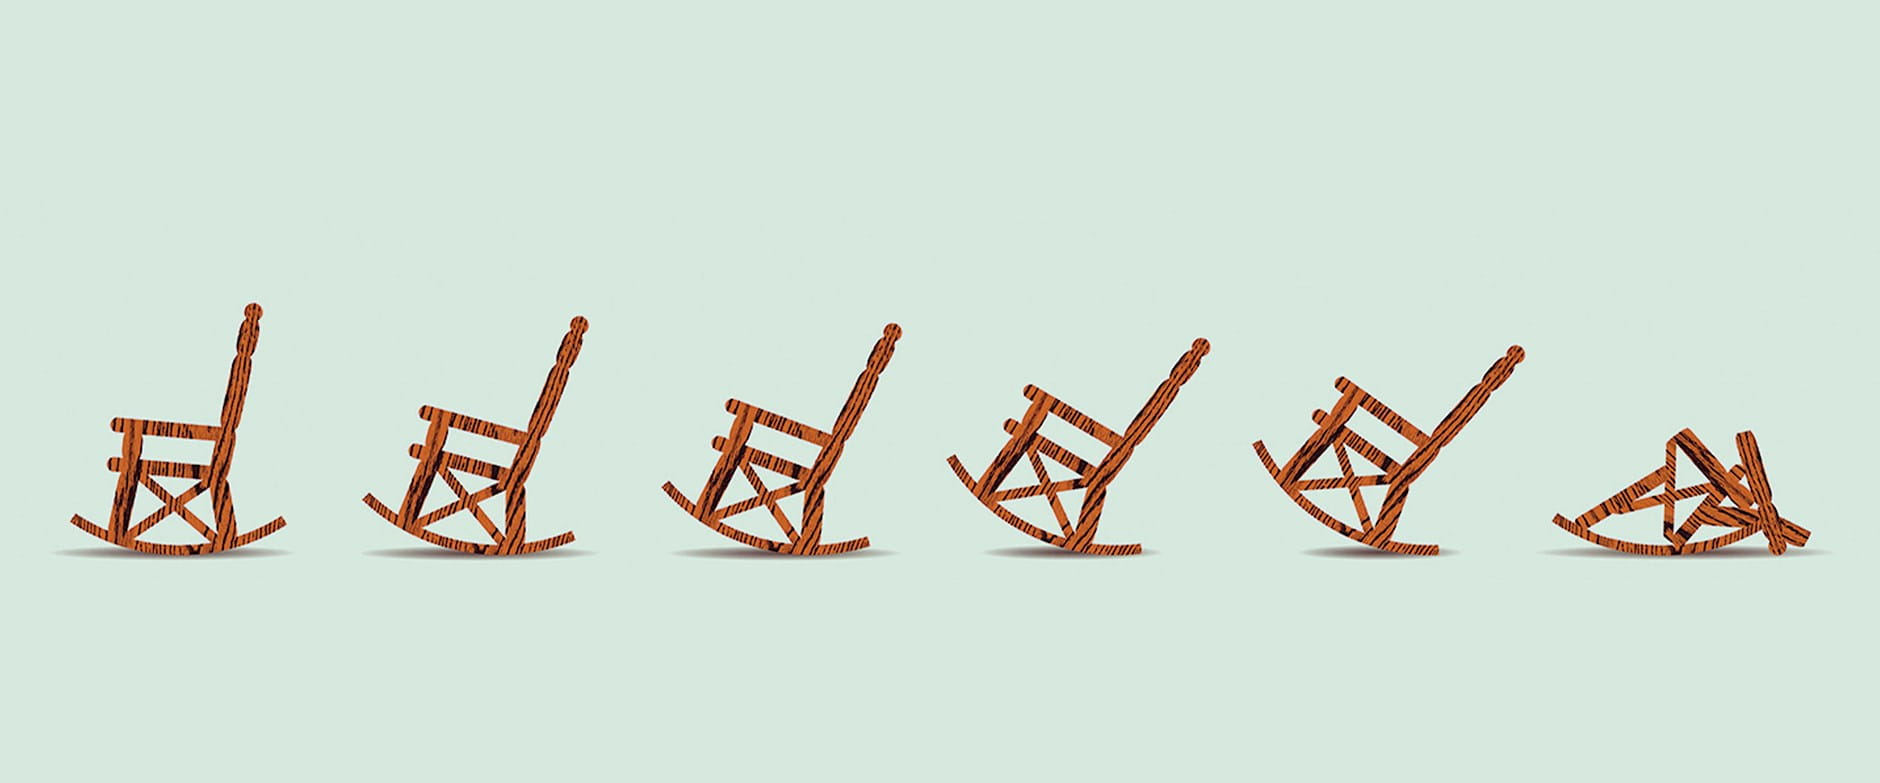 Progression of a breaking rocking chair